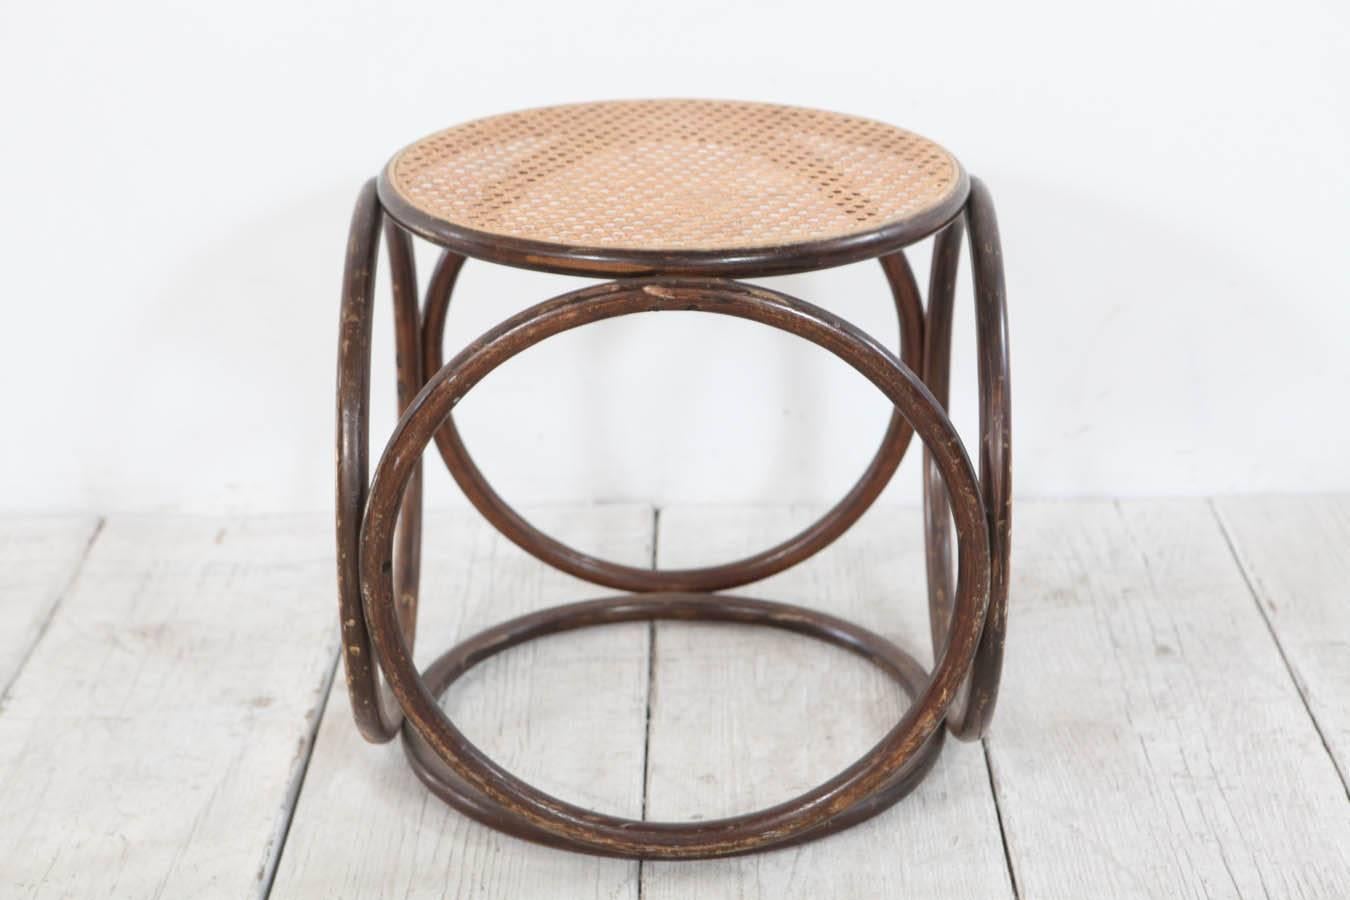 Geometric circular stool / occasional table with cane top.